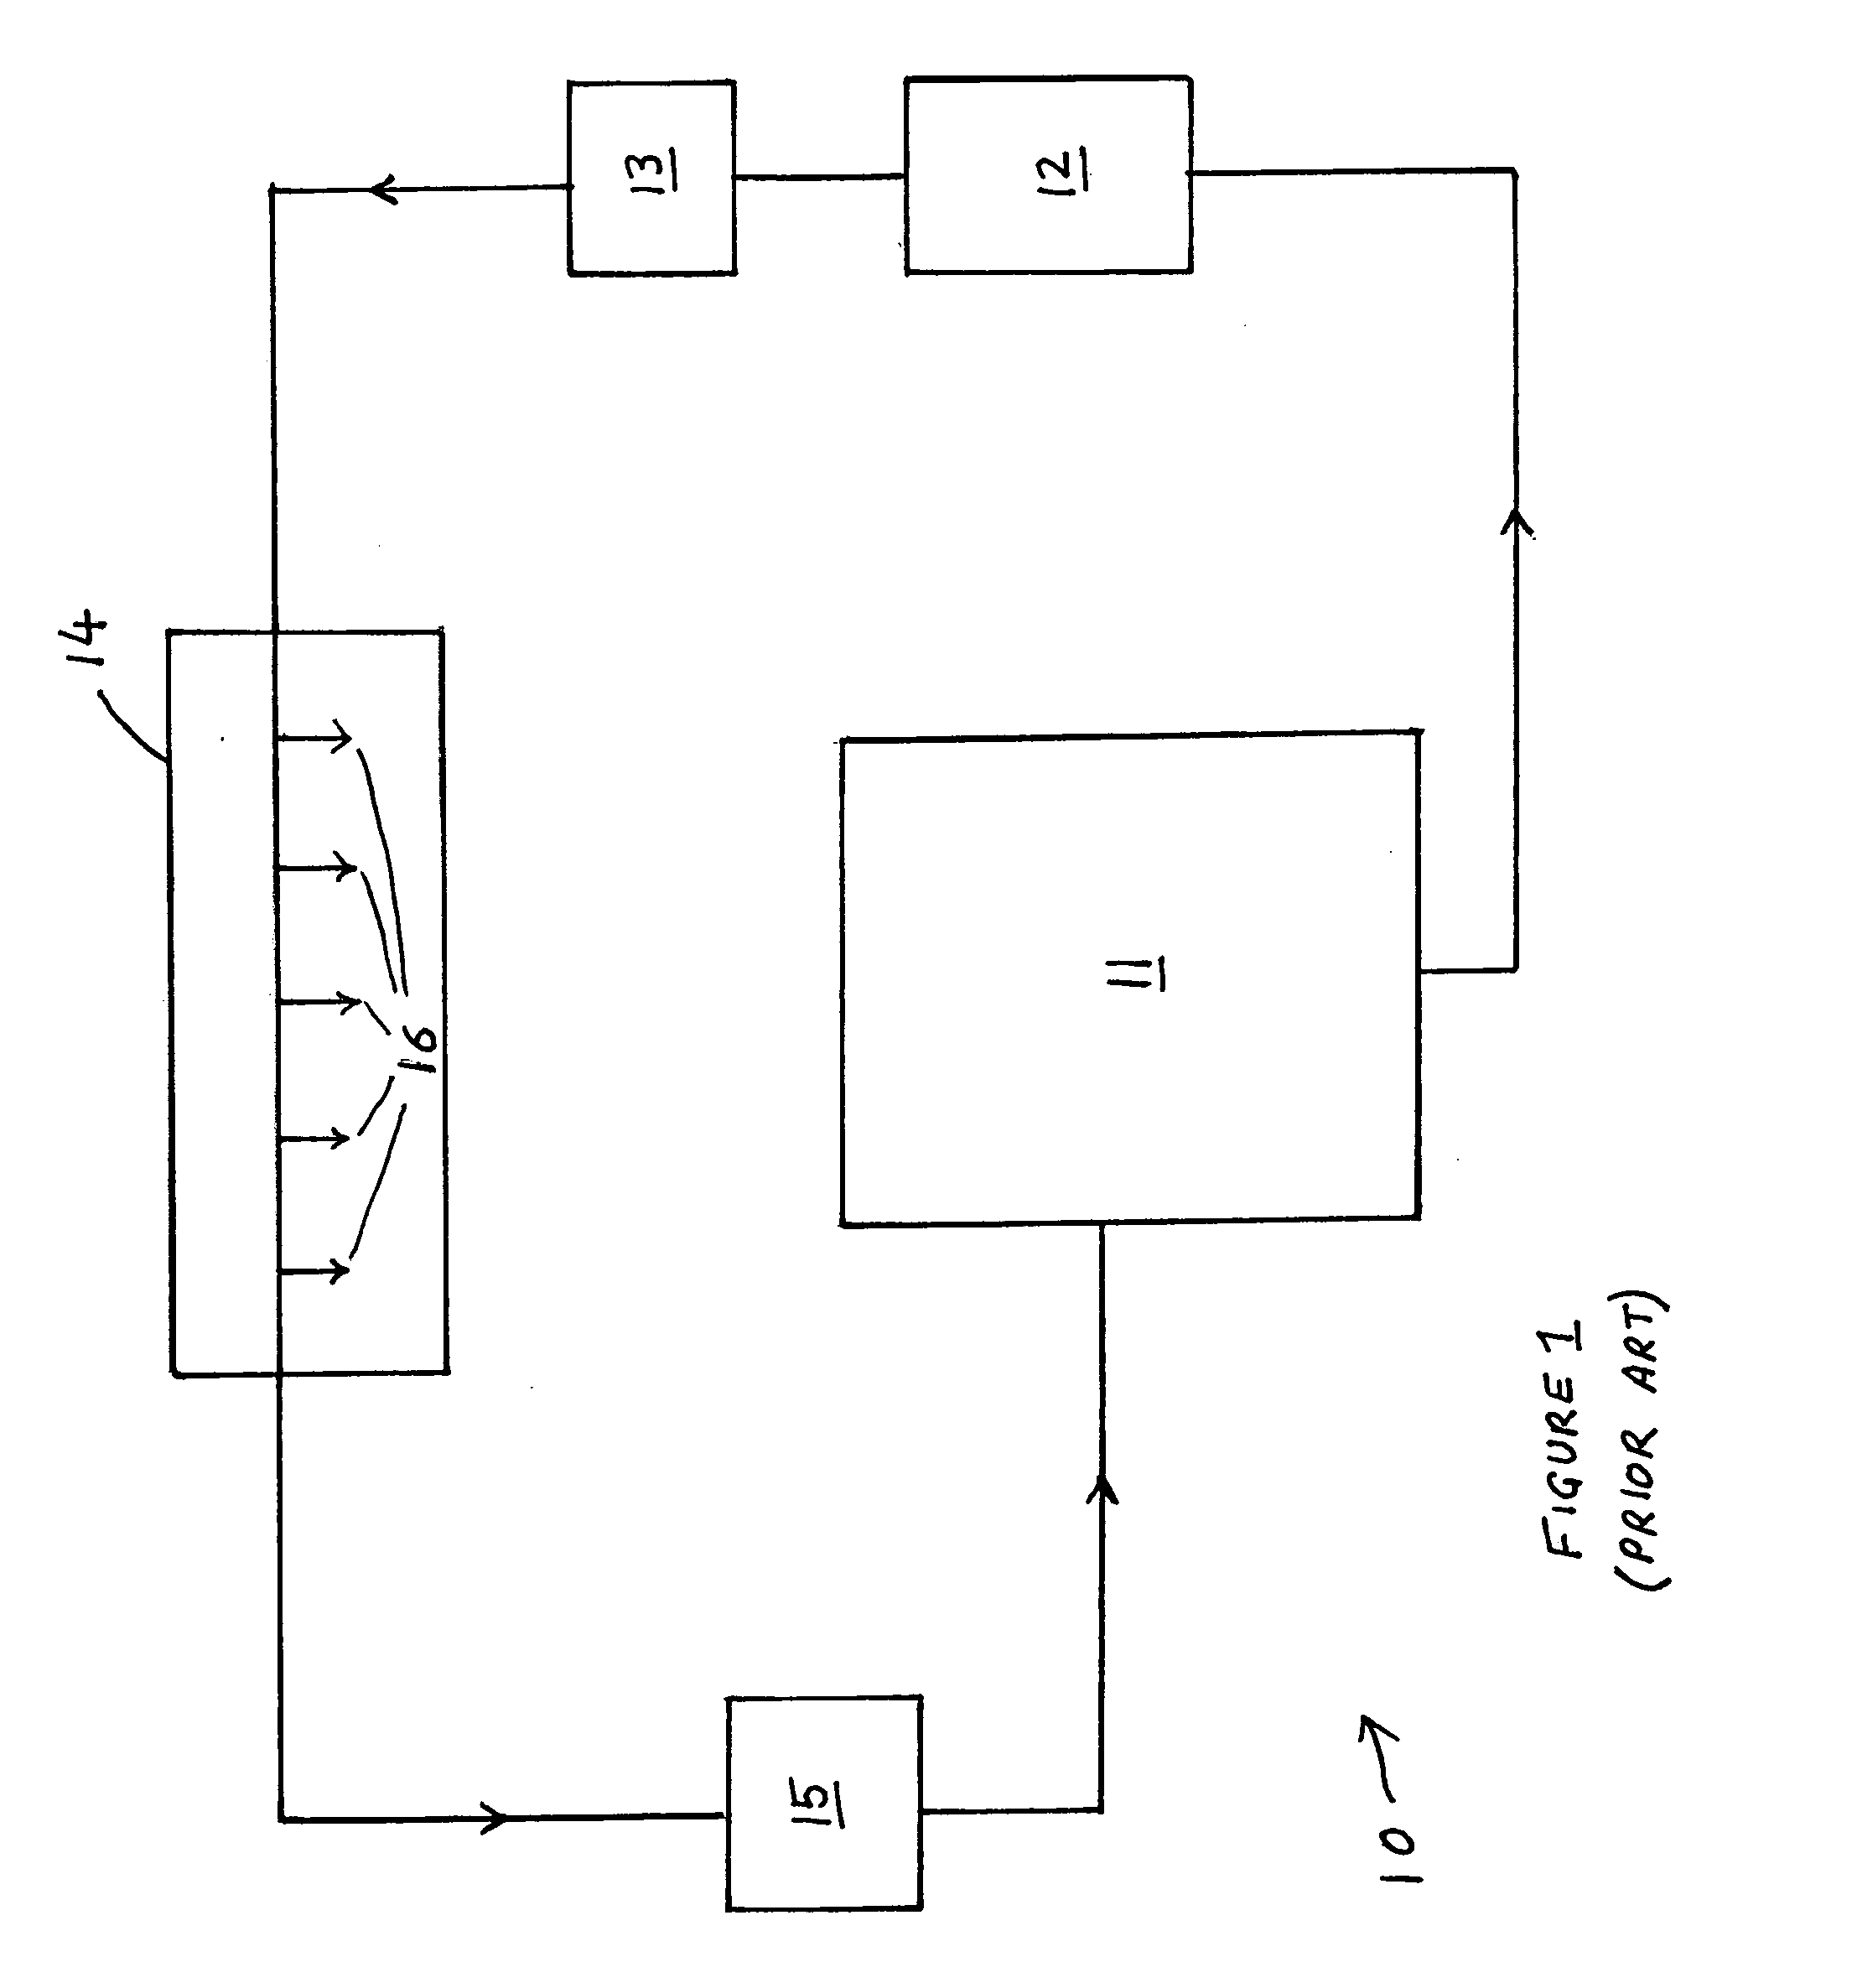 Paint circulating system and method